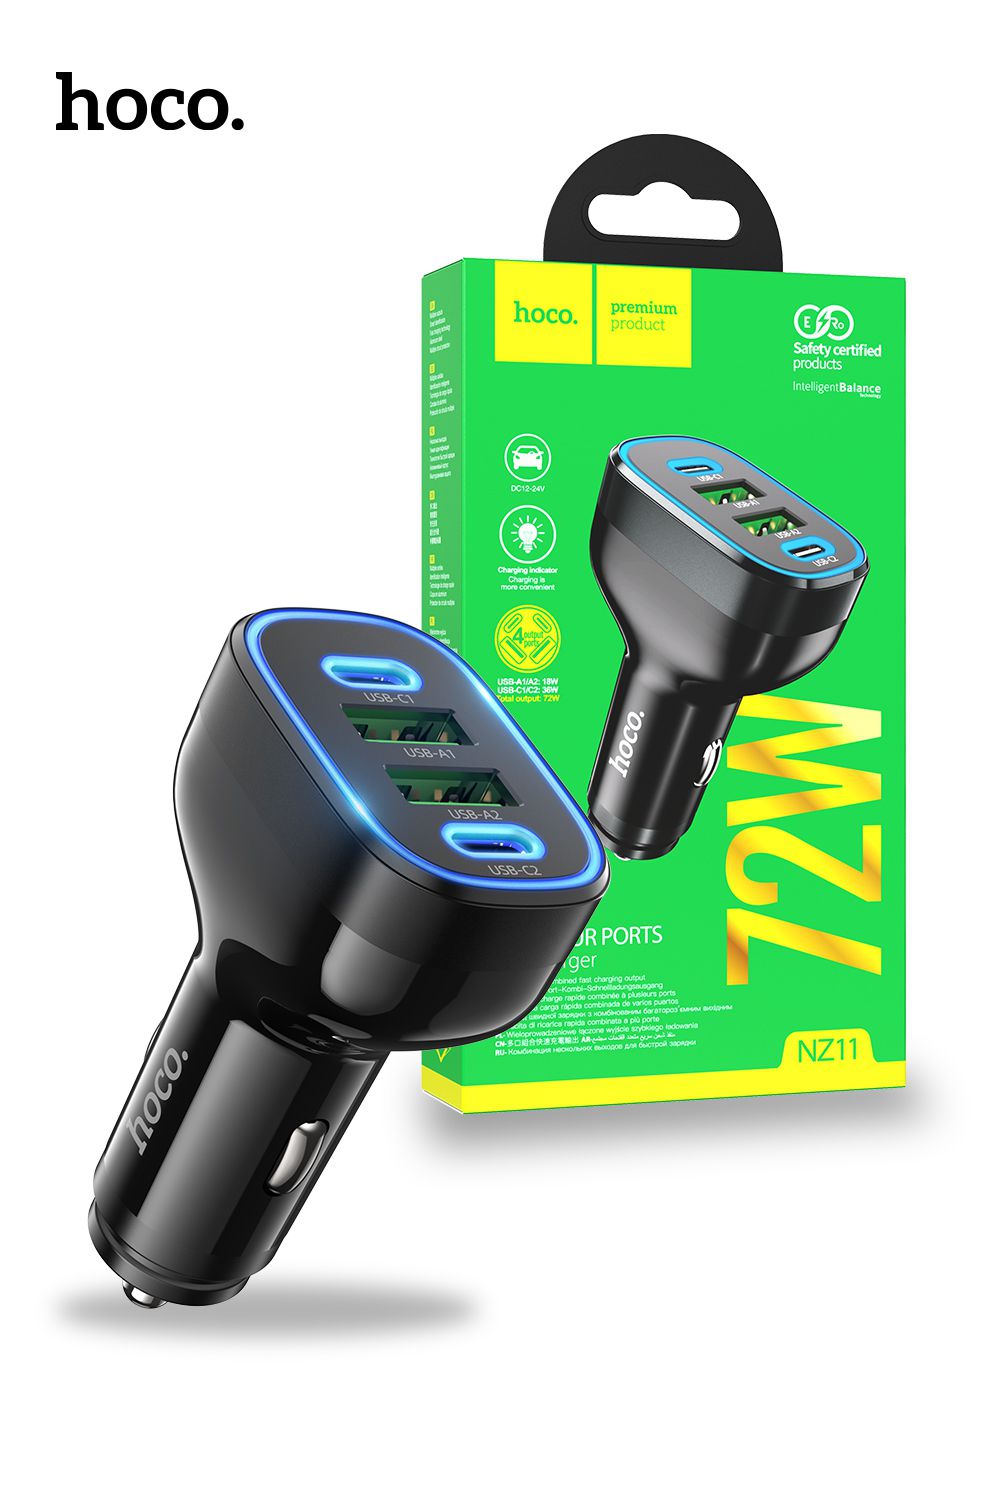 Univerasl Fast Guide PD72W 2C 2A Ports Car Charger For Smart Devices - Black